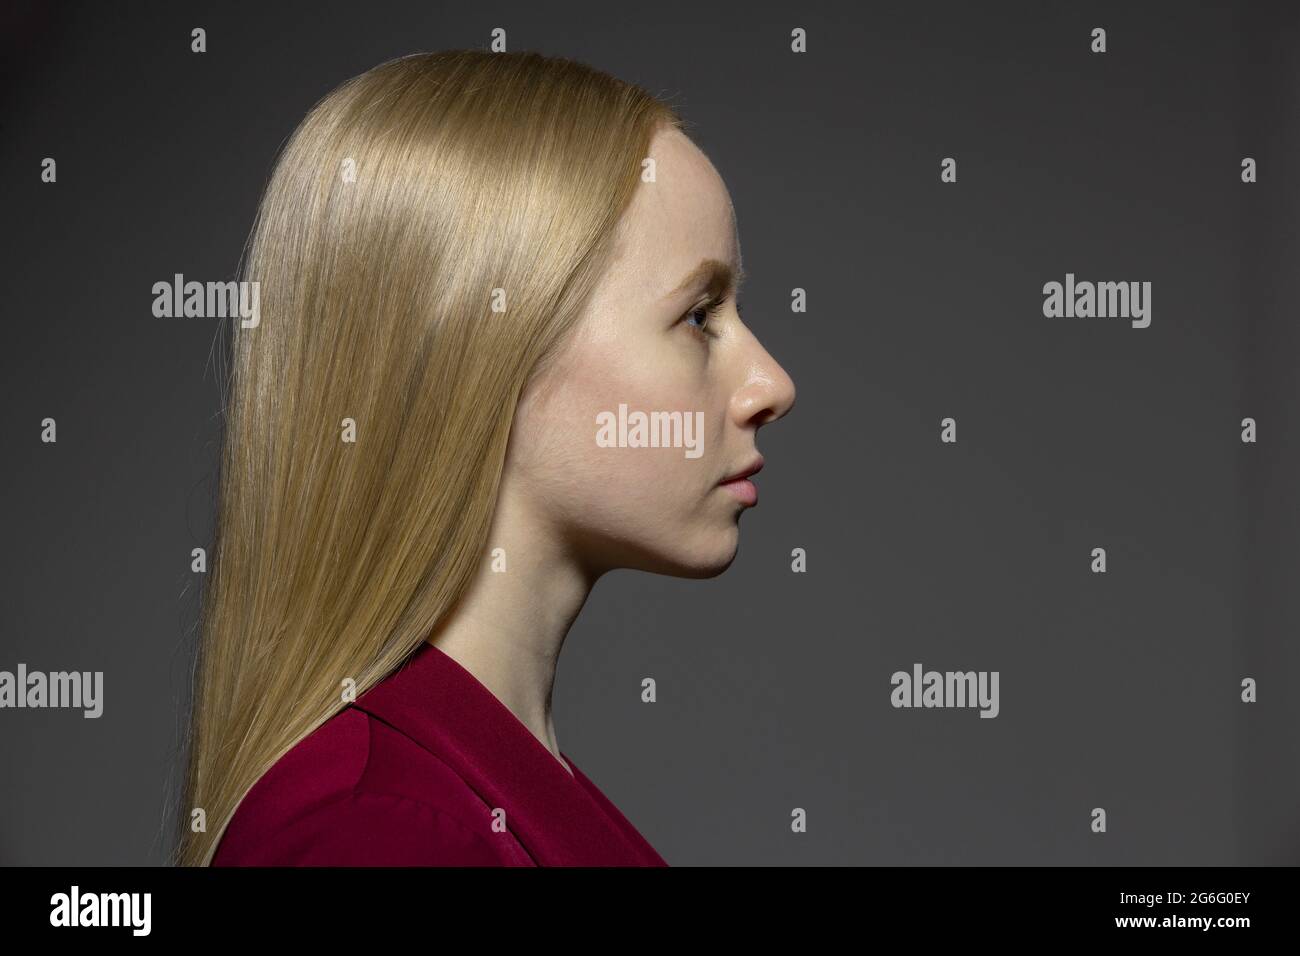 Profile portrait serious young woman with blonde hair Stock Photo